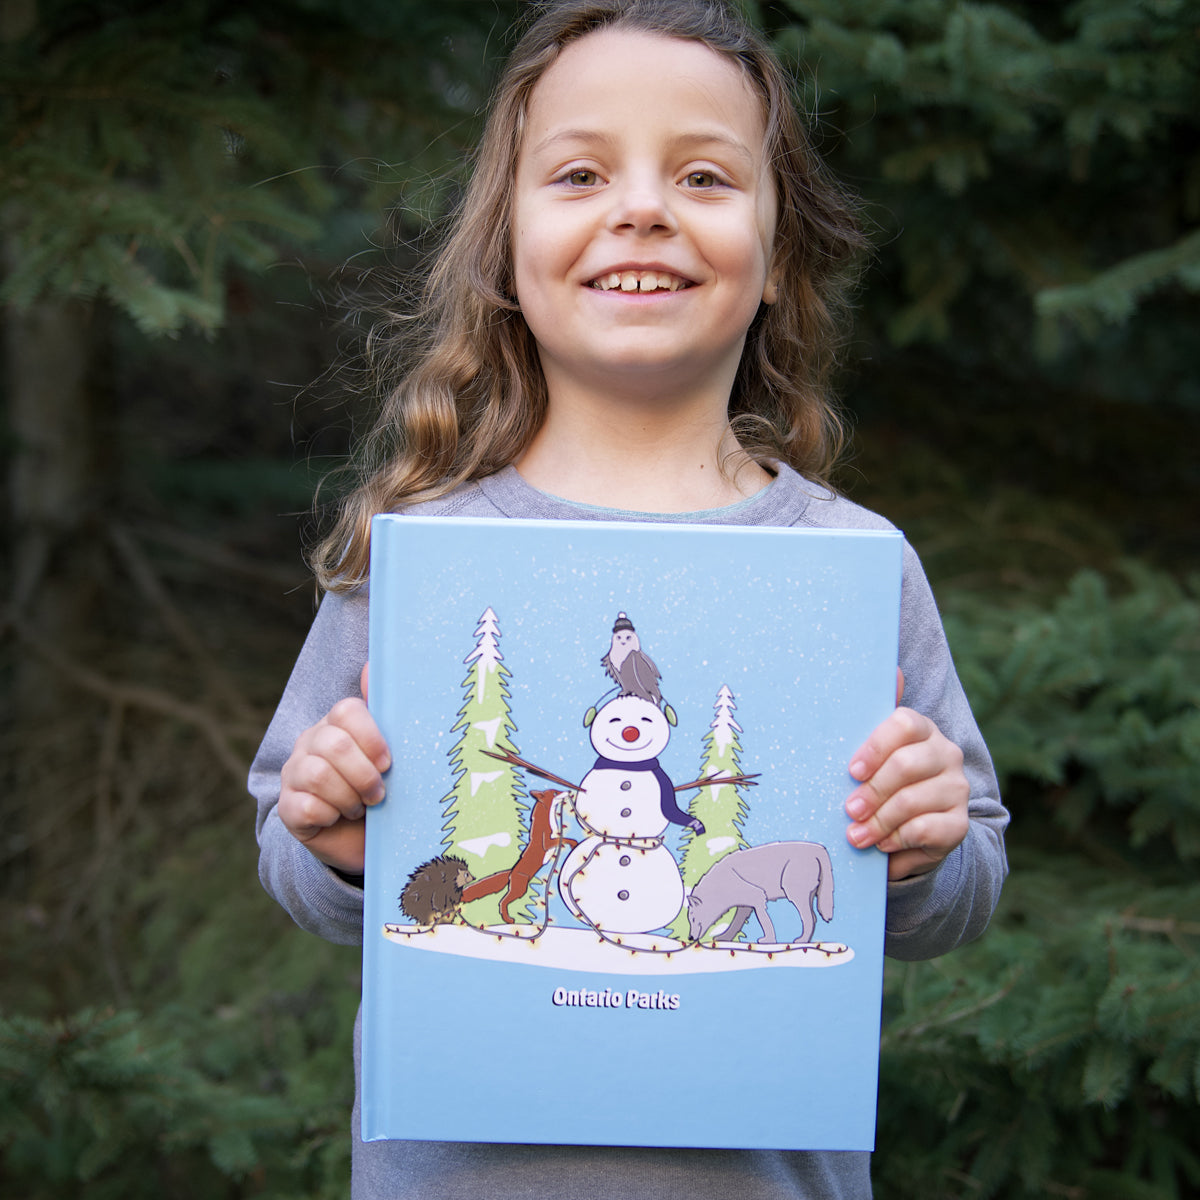 Child wearing grey longsleeve holding Blue Ontario Parks Sketchbook in front of pine trees with animals in winter scene on front cover. Cartoon animals include wolf, porcupine, fox and owl putting light around a snowman.